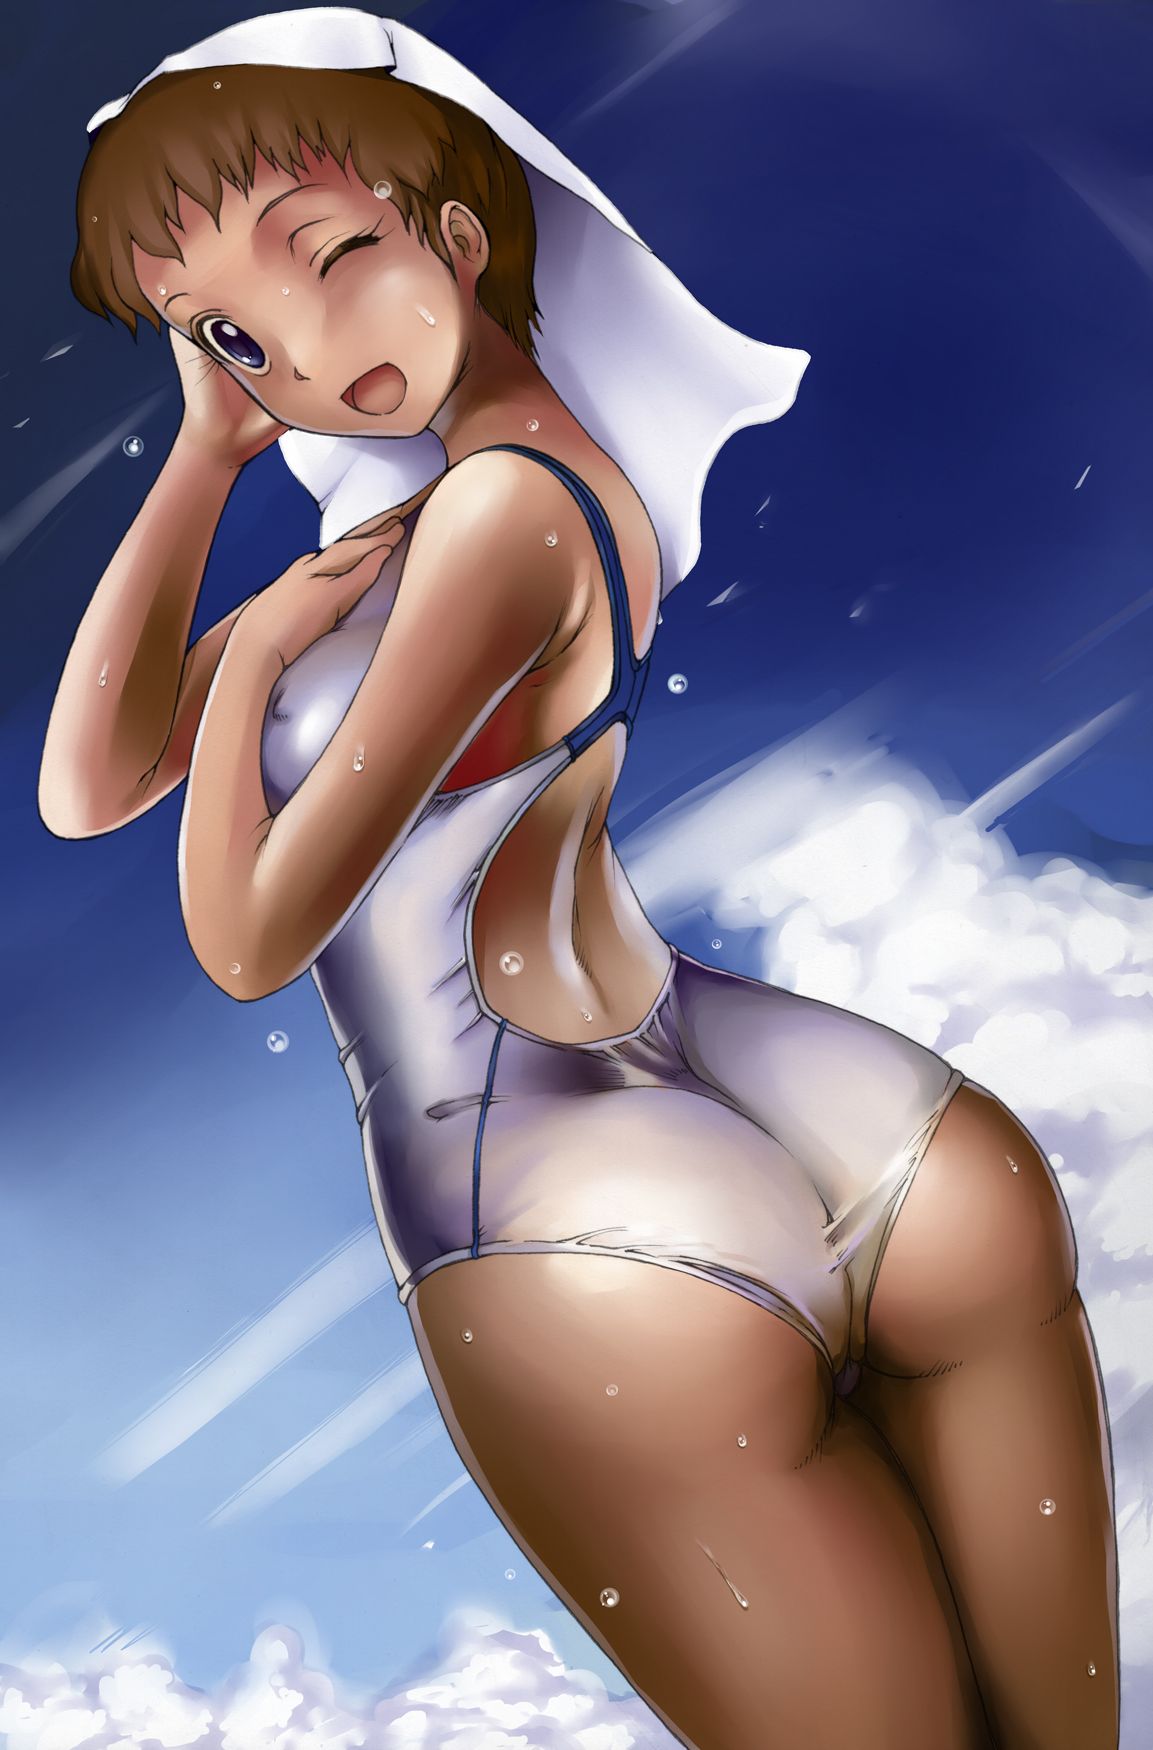 【Secondary】Erotic image excited by a girl wearing a pitch pichi swimming swimsuit 4